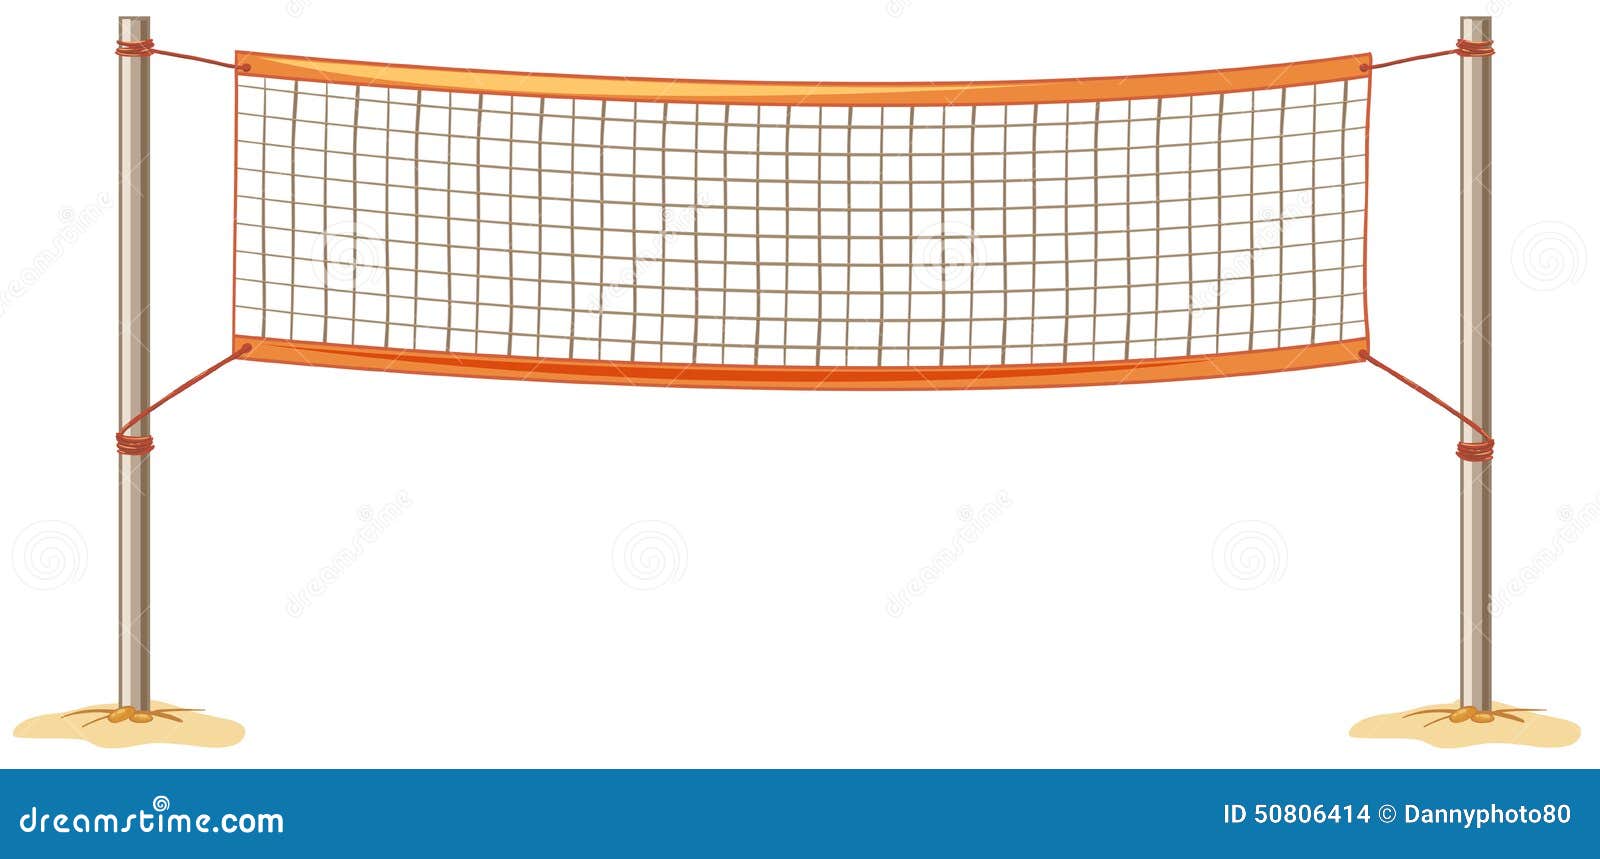 clipart volleyball net - photo #32